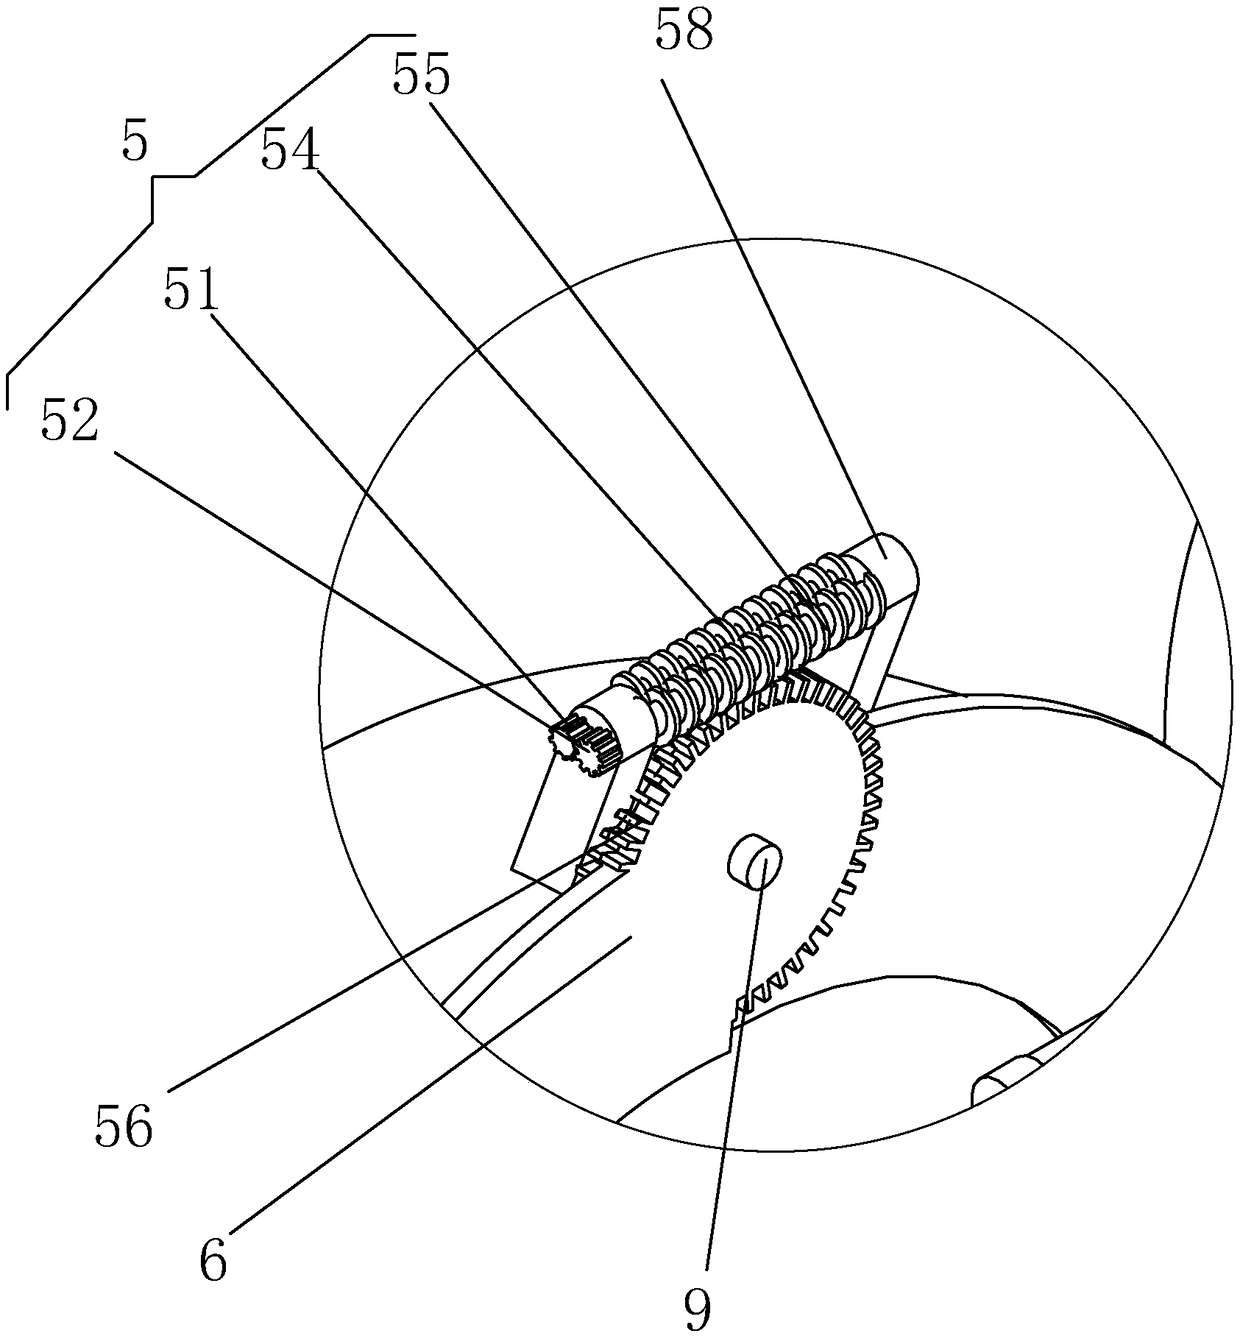 Peach pit removing device